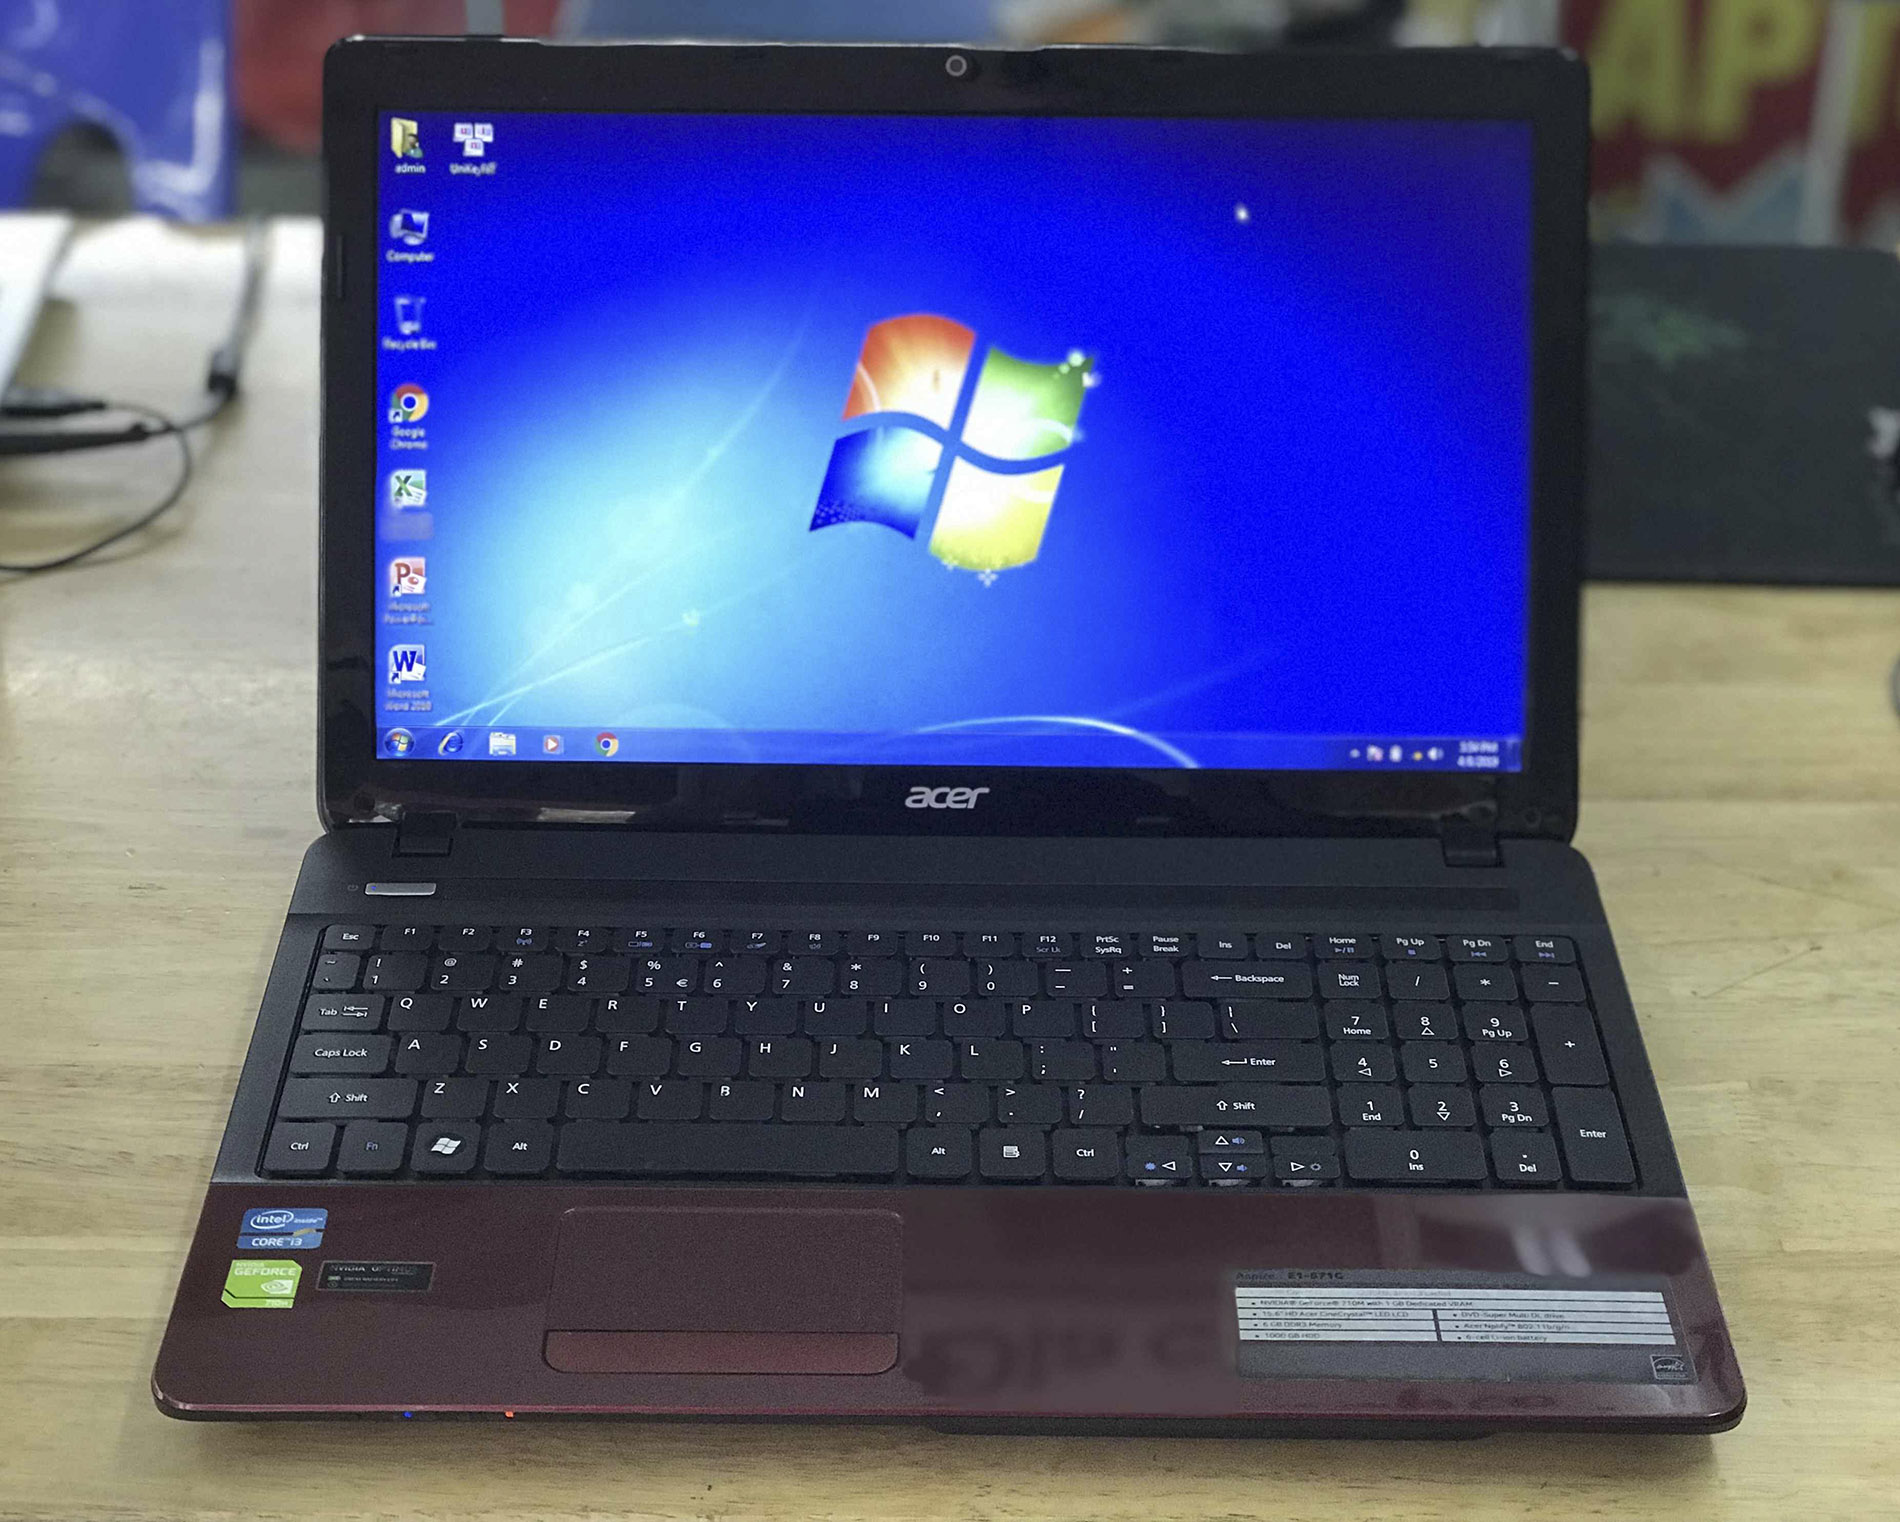 Thiết kế của laptop Acer Aspire E1-571G